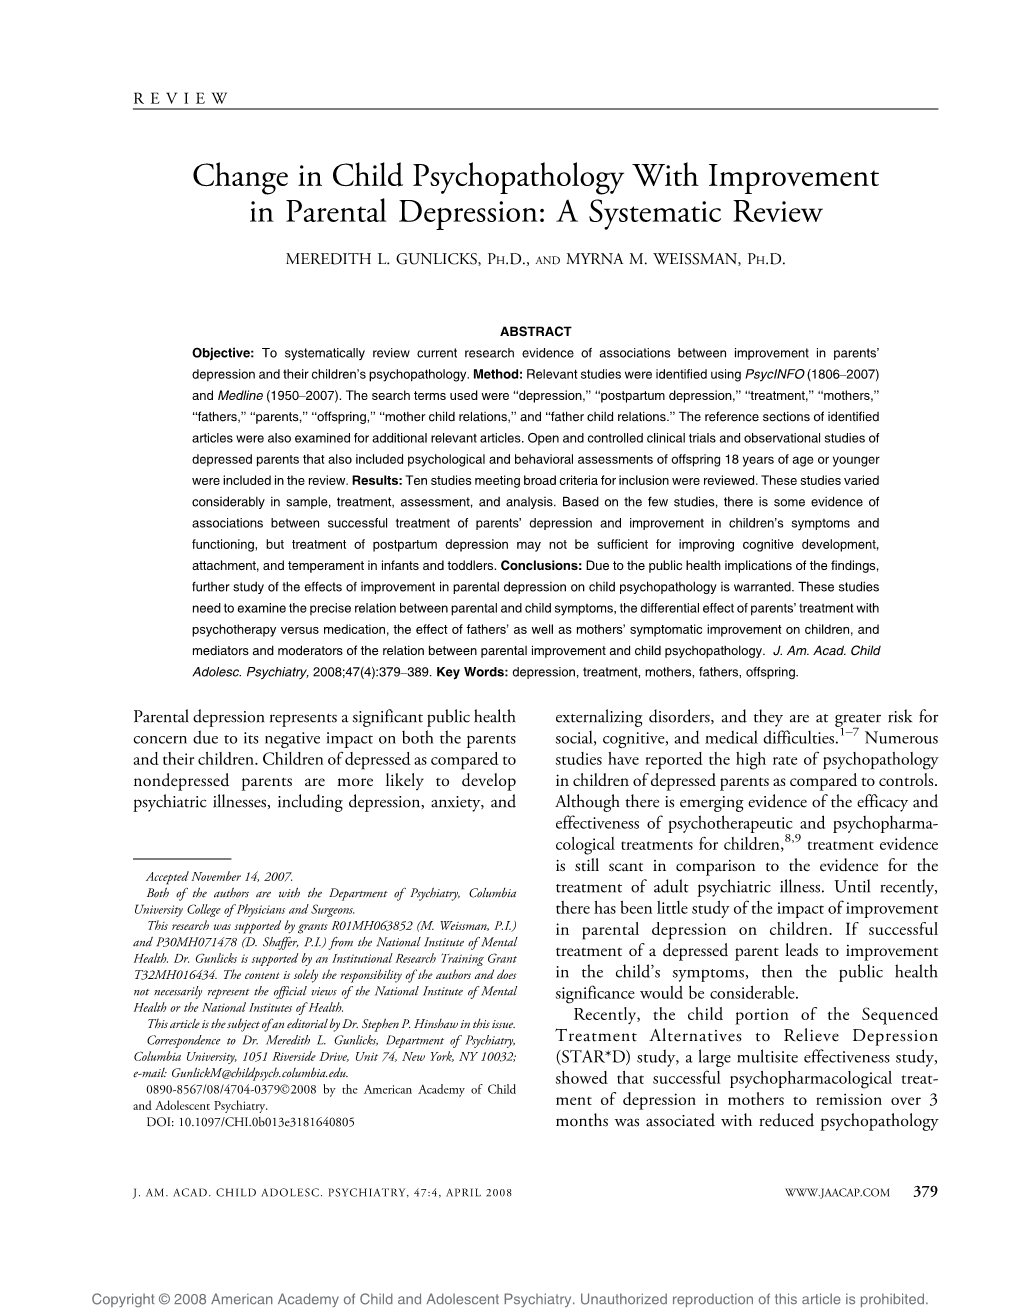 Change in Child Psychopathology with Improvement in Parental Depression: a Systematic Review